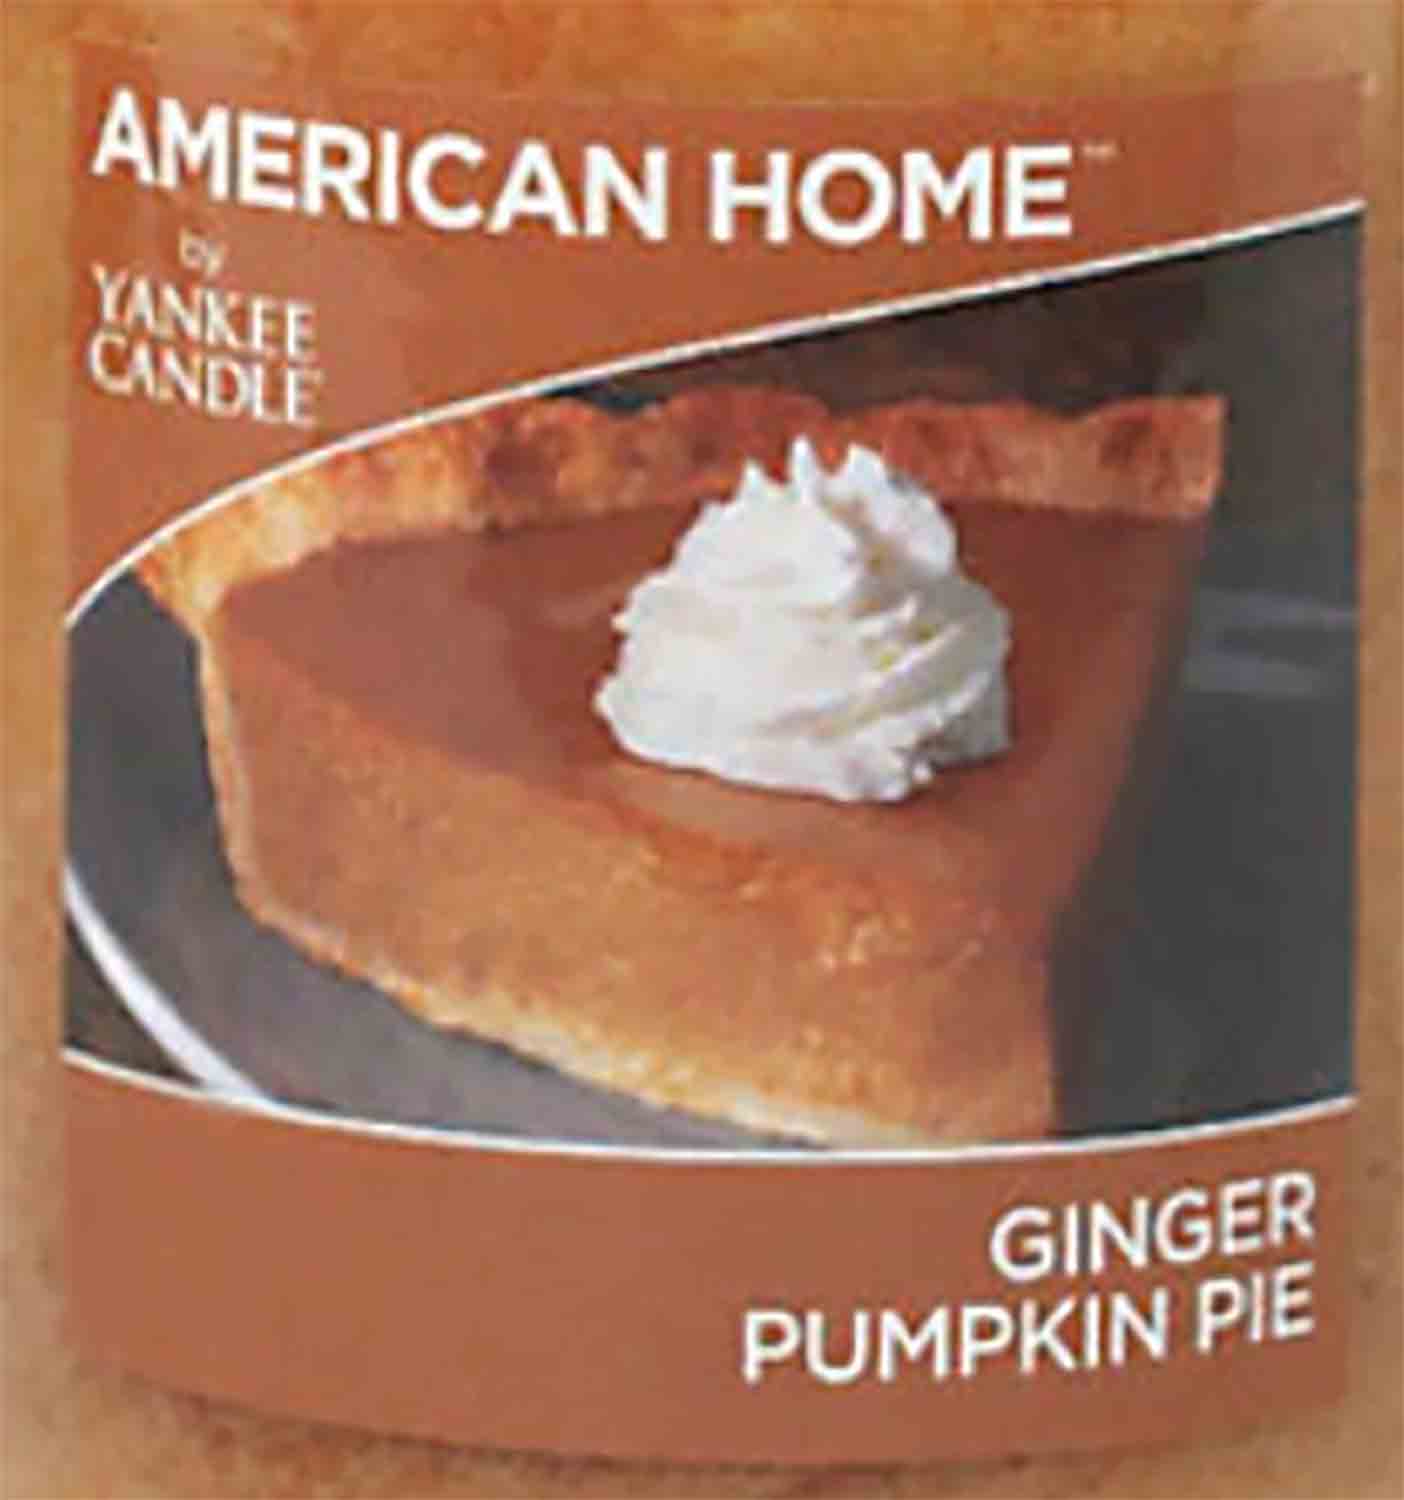 Yankee Candle Ginger Pumpkin Pie 22g - Crumble vosk